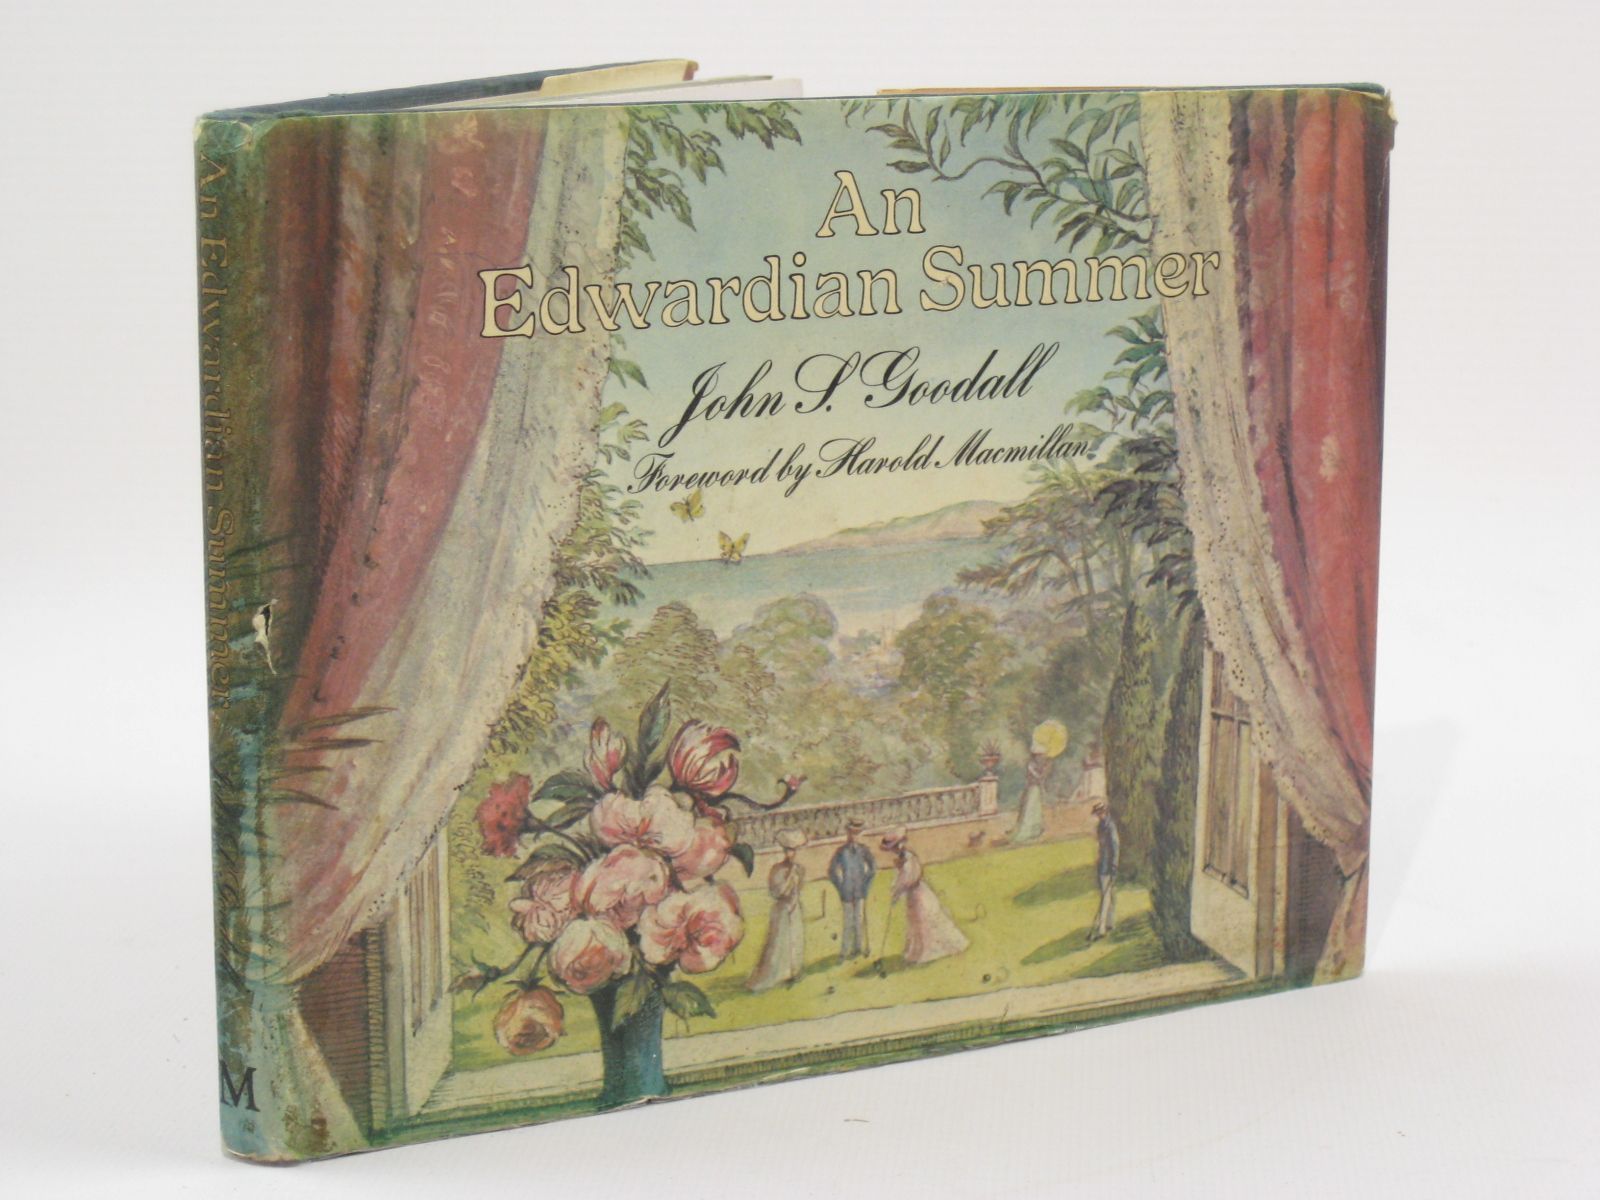 Photo of AN EDWARDIAN SUMMER written by Goodall, John S. illustrated by Goodall, John S. published by Macmillan London Limited (STOCK CODE: 1407098)  for sale by Stella & Rose's Books